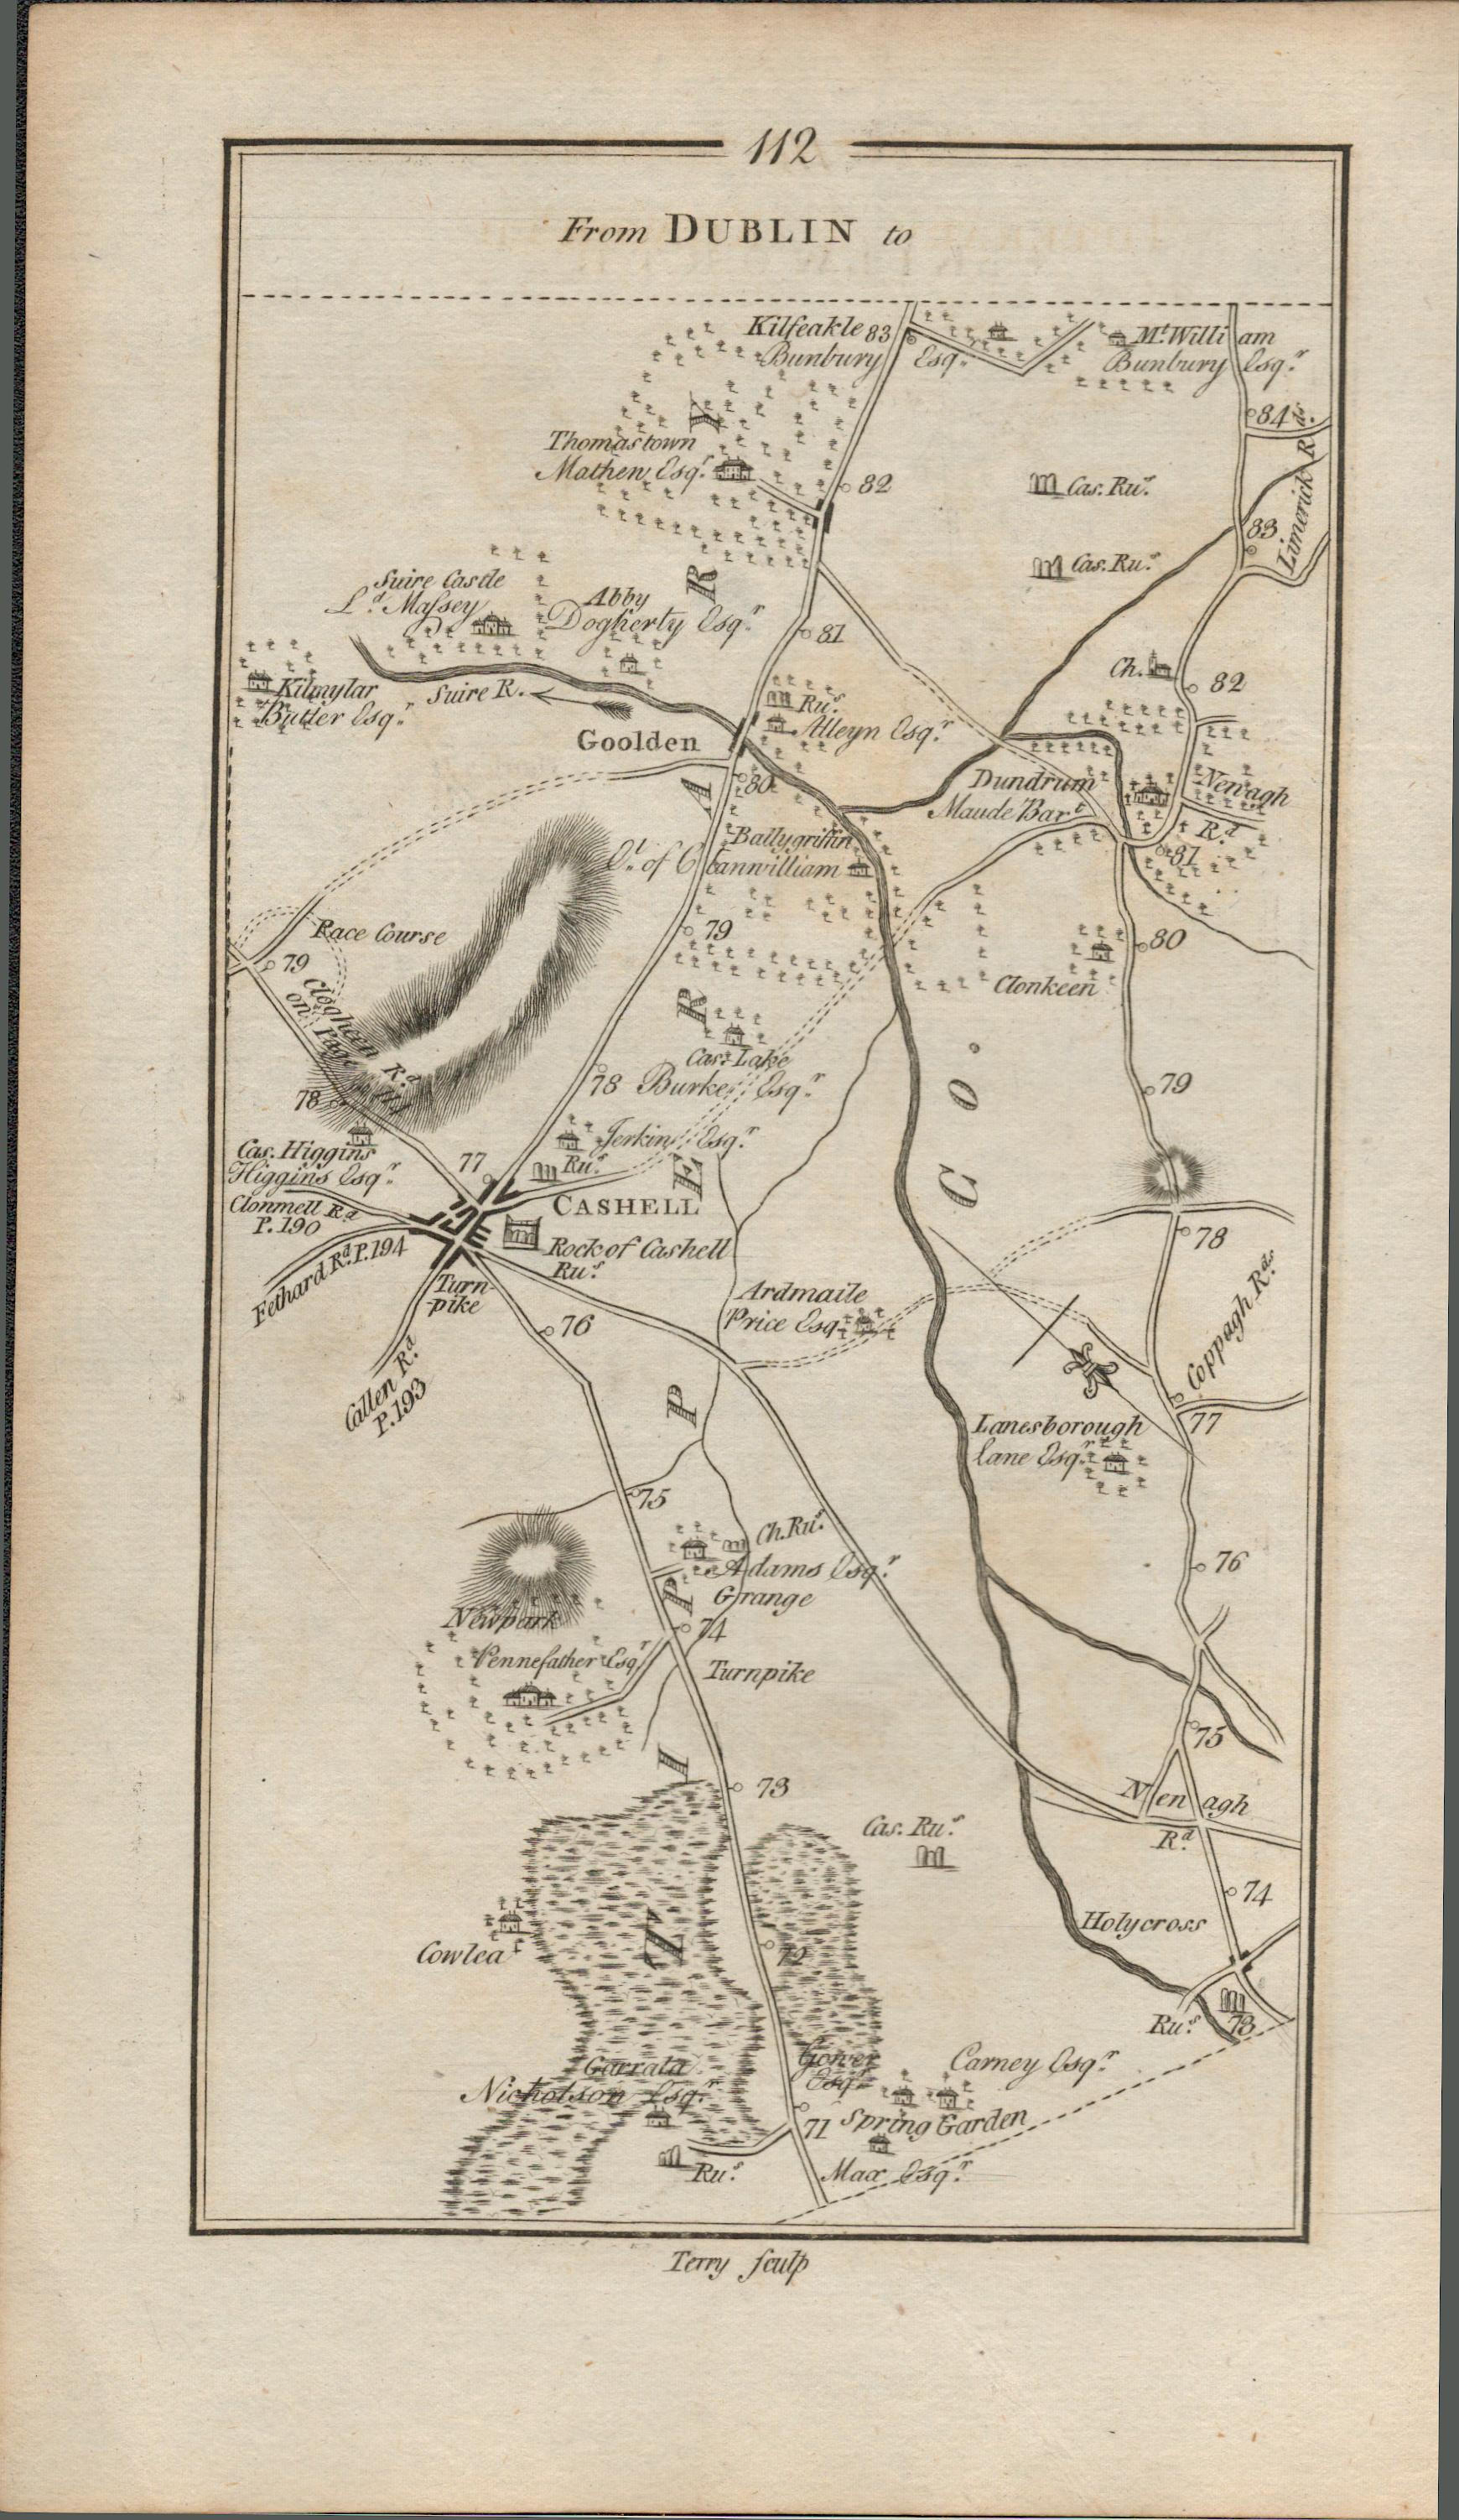 Taylor & Skinner 1777 Road Map Thurles Cashel Co Tipperary Co Kilkenny. - Image 2 of 2